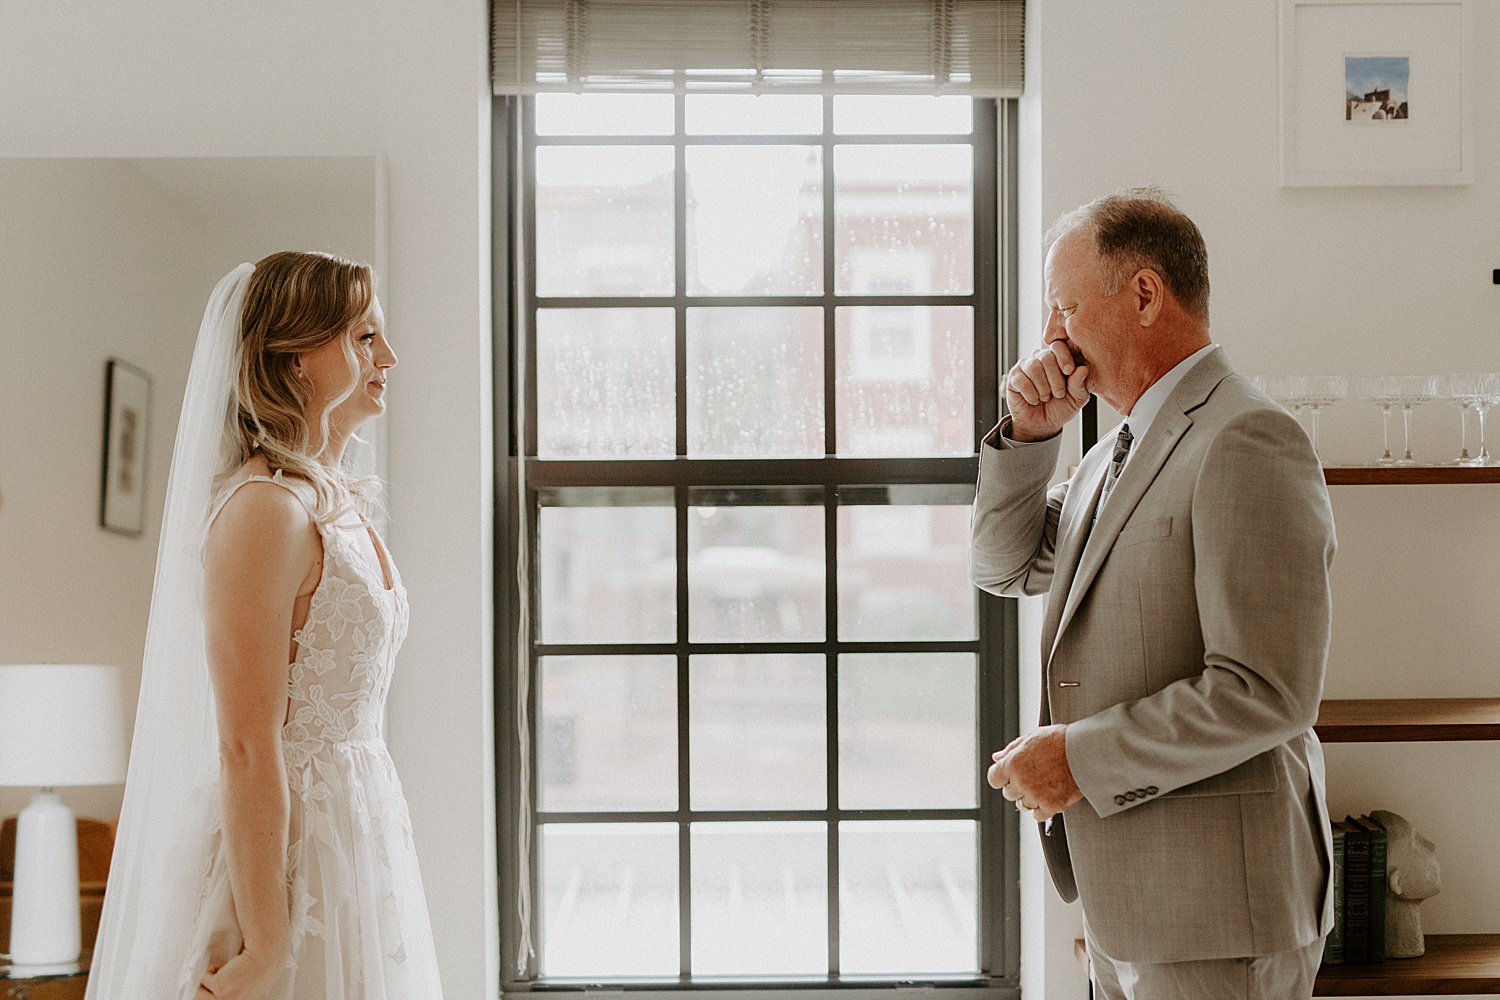 Dad and daughter seeing each other for the first time on wedding day